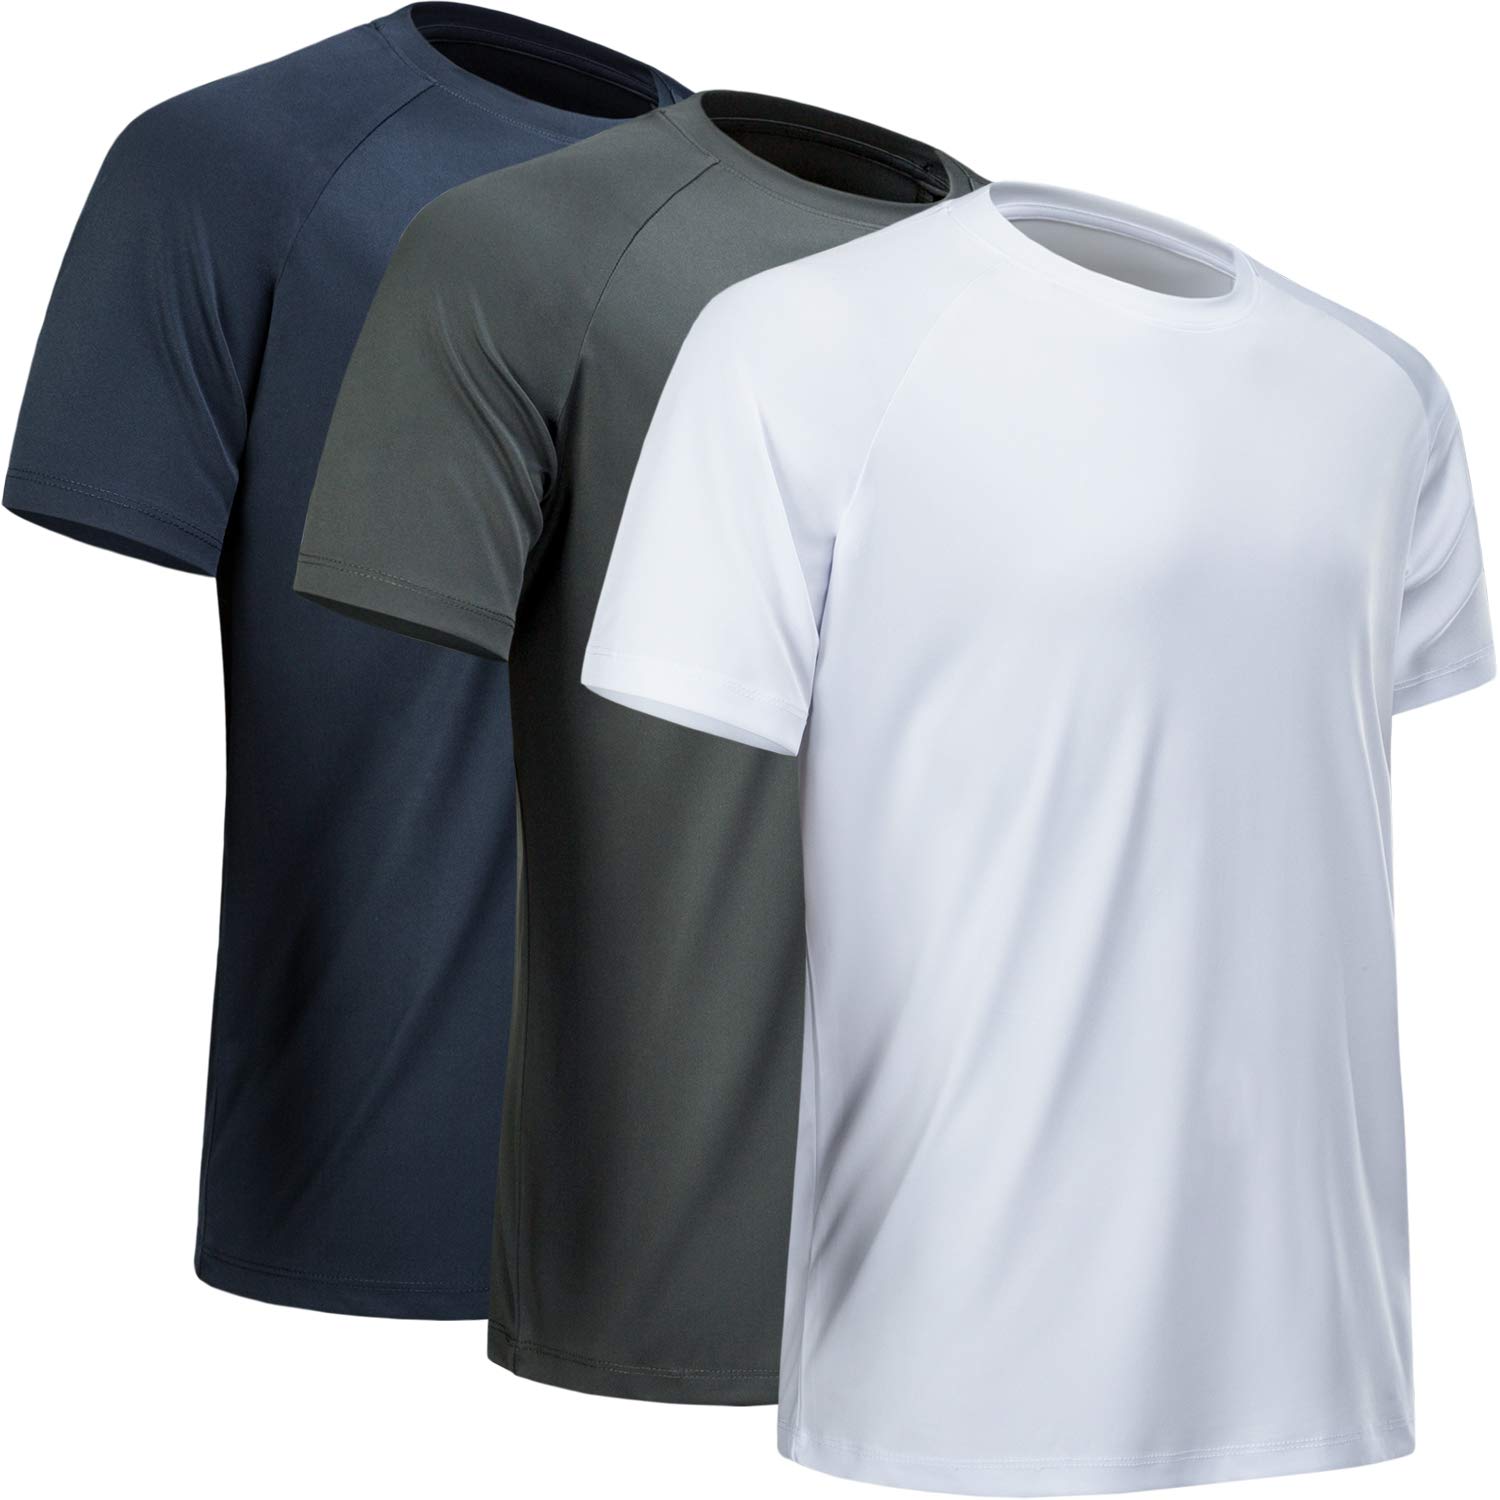 Mcporo Workout Shirts For Men Short Sleeve Quick Dry Athletic Gym Active T Shirt Moisture Wicking